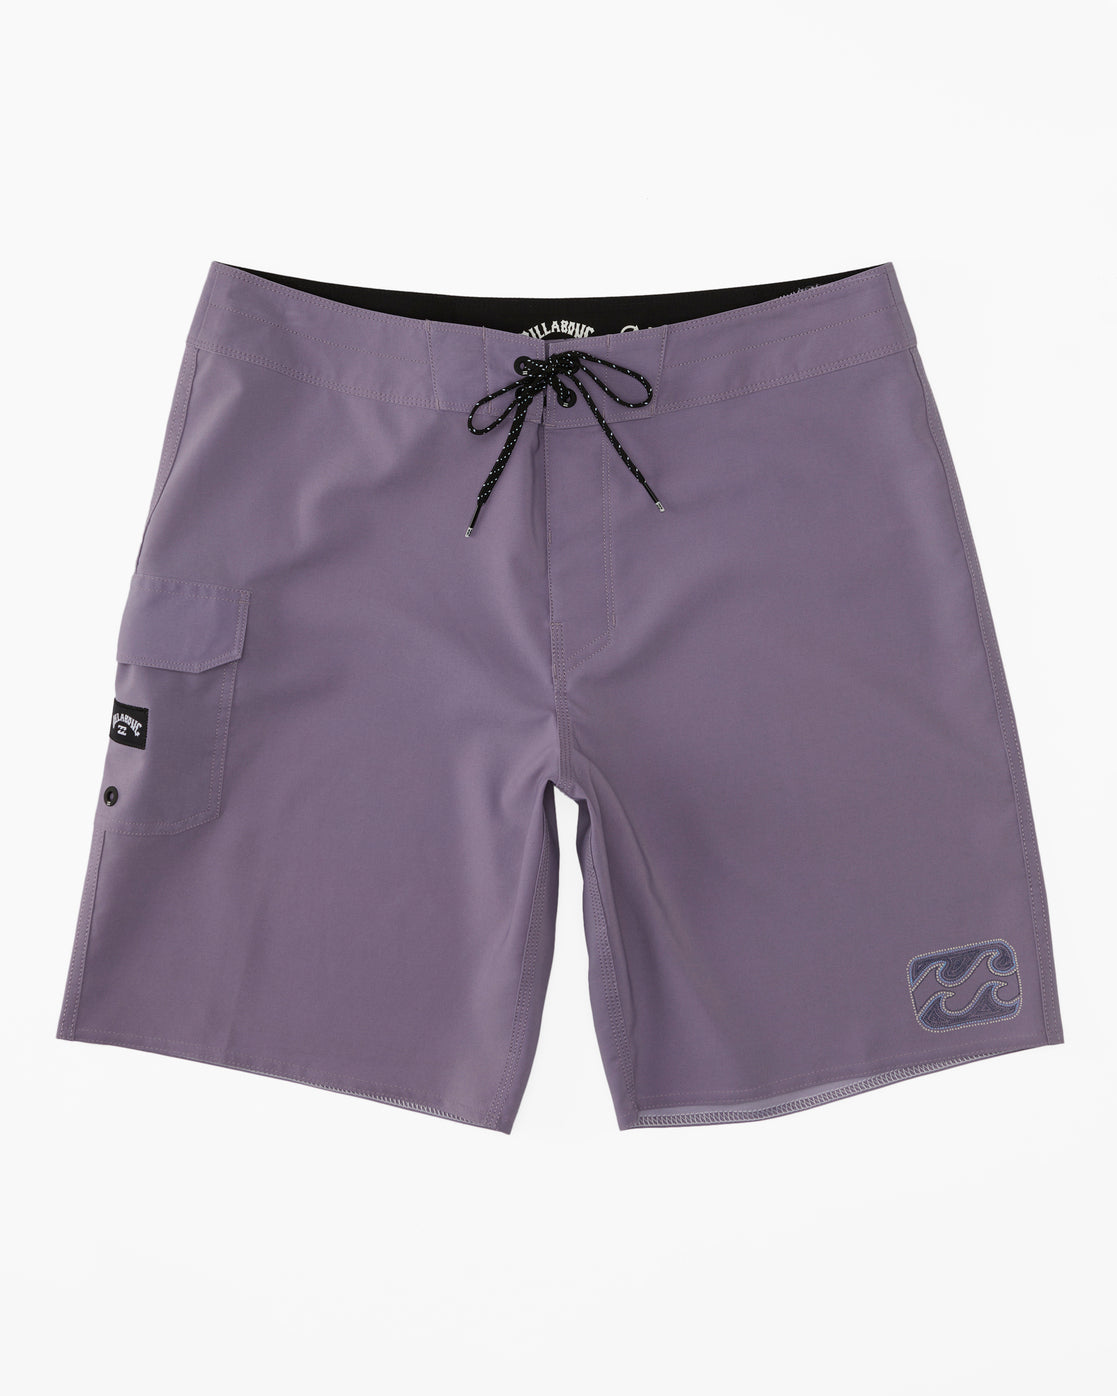 ARCH PRO SHORTS - ABYBS00443